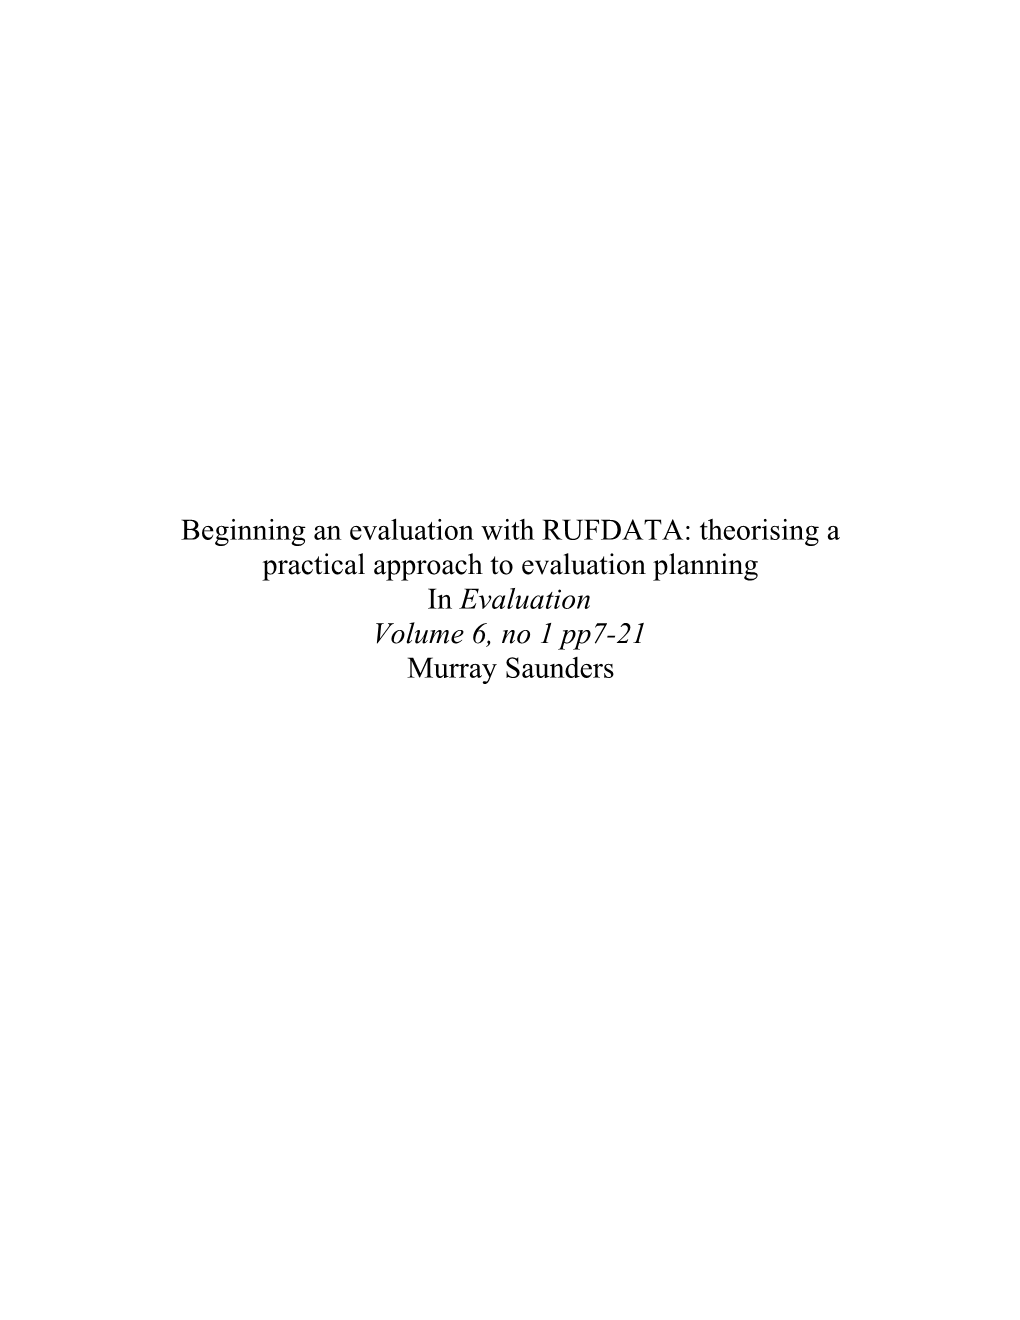 Beginning an Evaluation with RUFDATA: Theorising a Practical Approach to Evaluation Planning